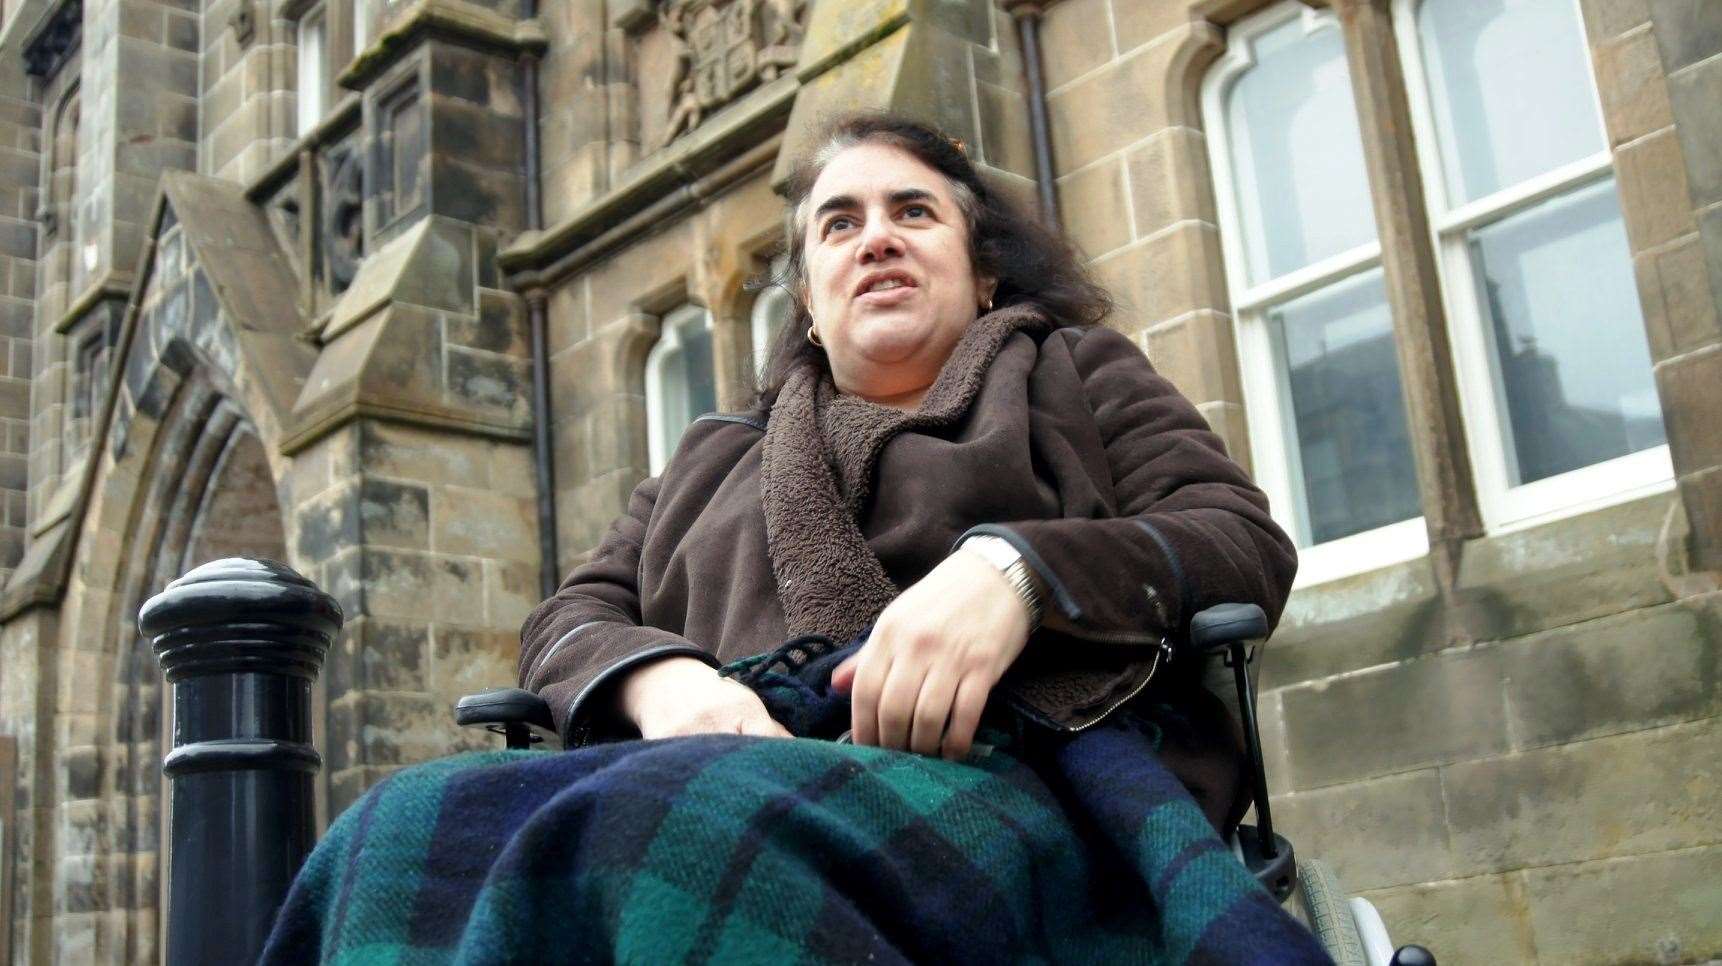 Louise Smith has been campaigning for disability rights for many years. Picture: DGS